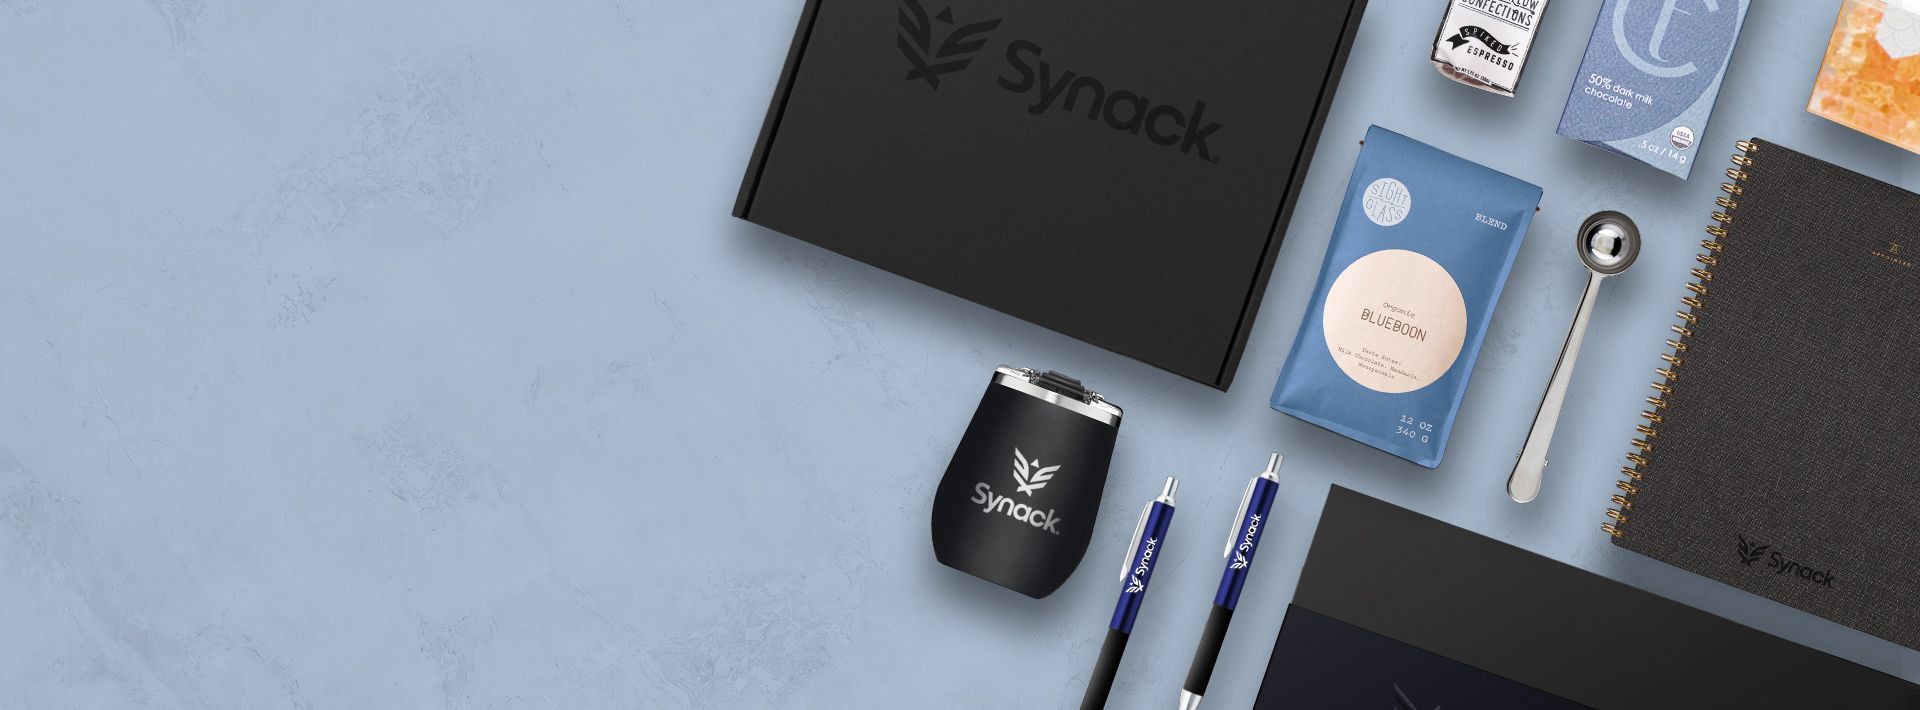 branded swag products and packaging